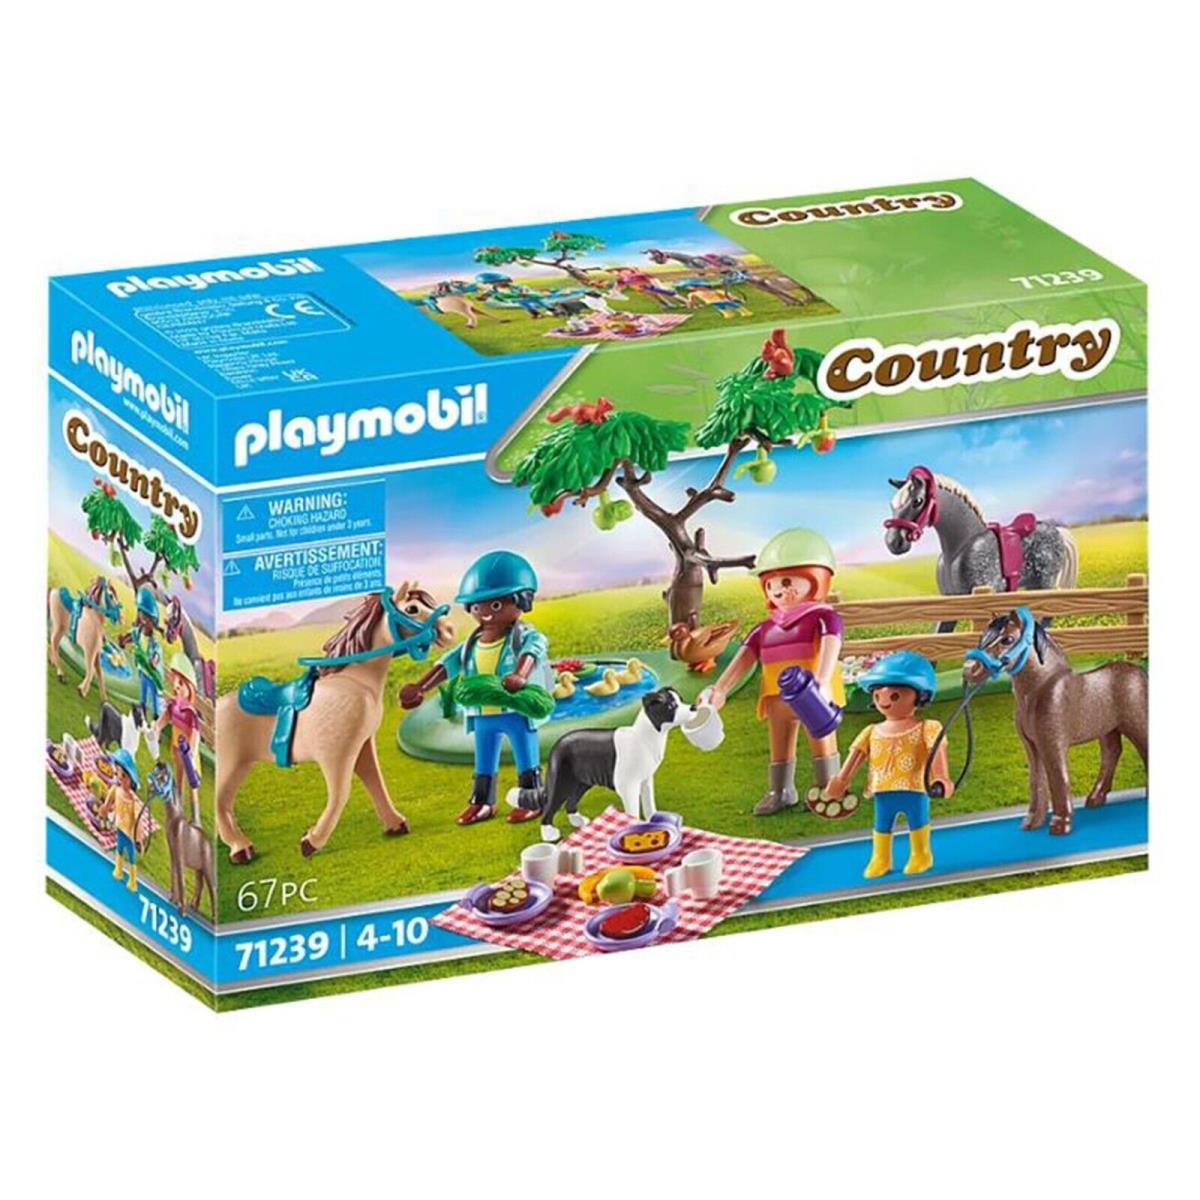 Playmobil Country Picnic Adventure with Horses Building Set 71239